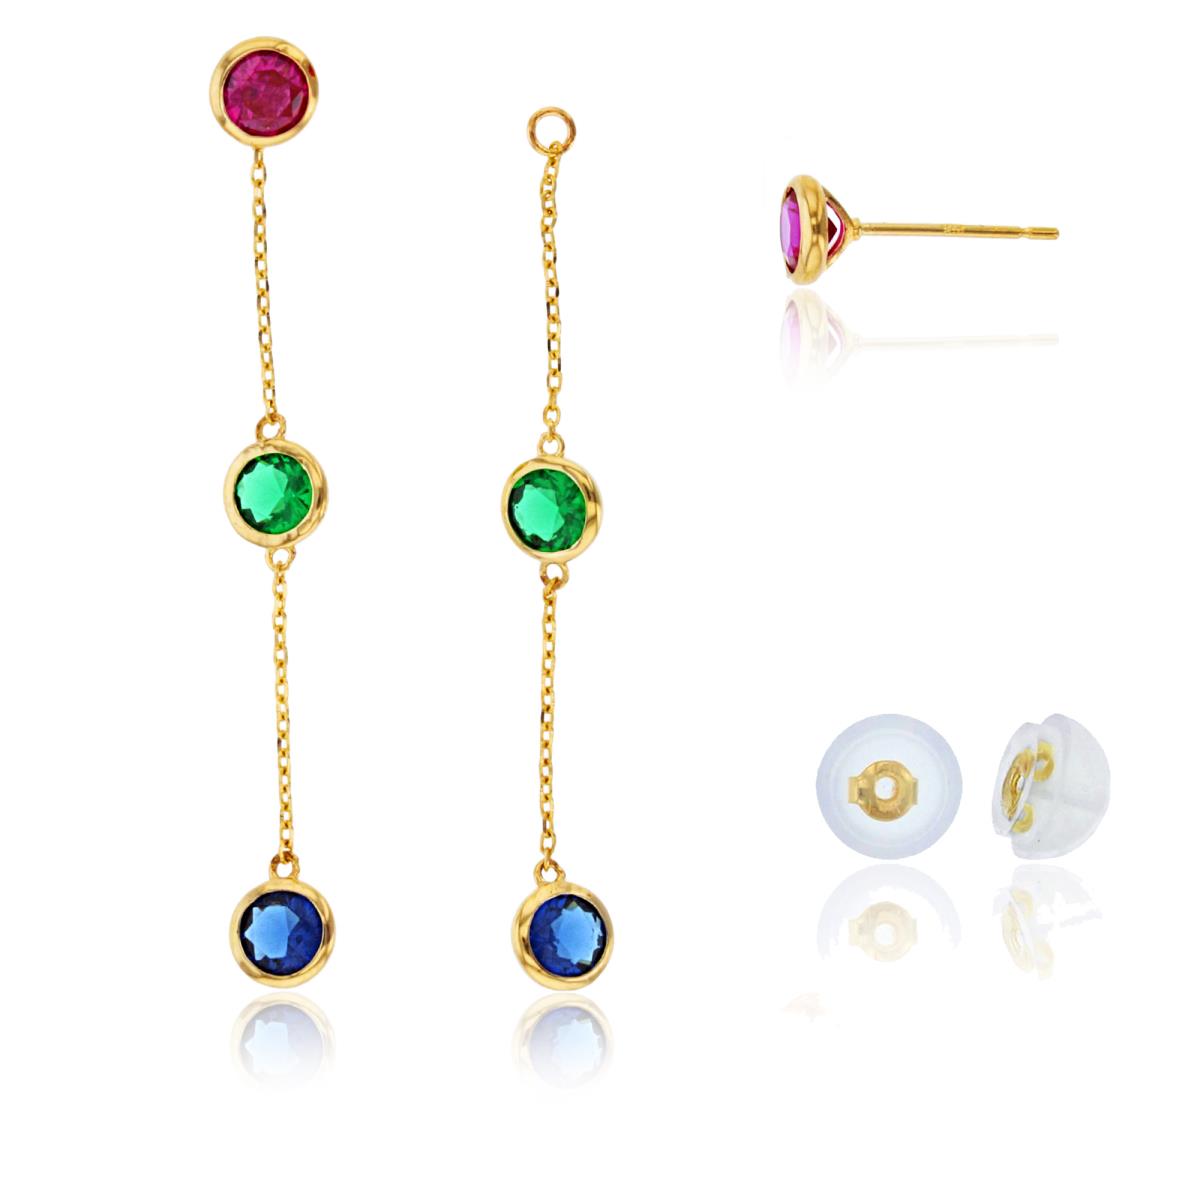 10K Yellow Gold Rnd Chrome Diopside Bezel Studs on Linked Dangling Earrings with Silicon Backs